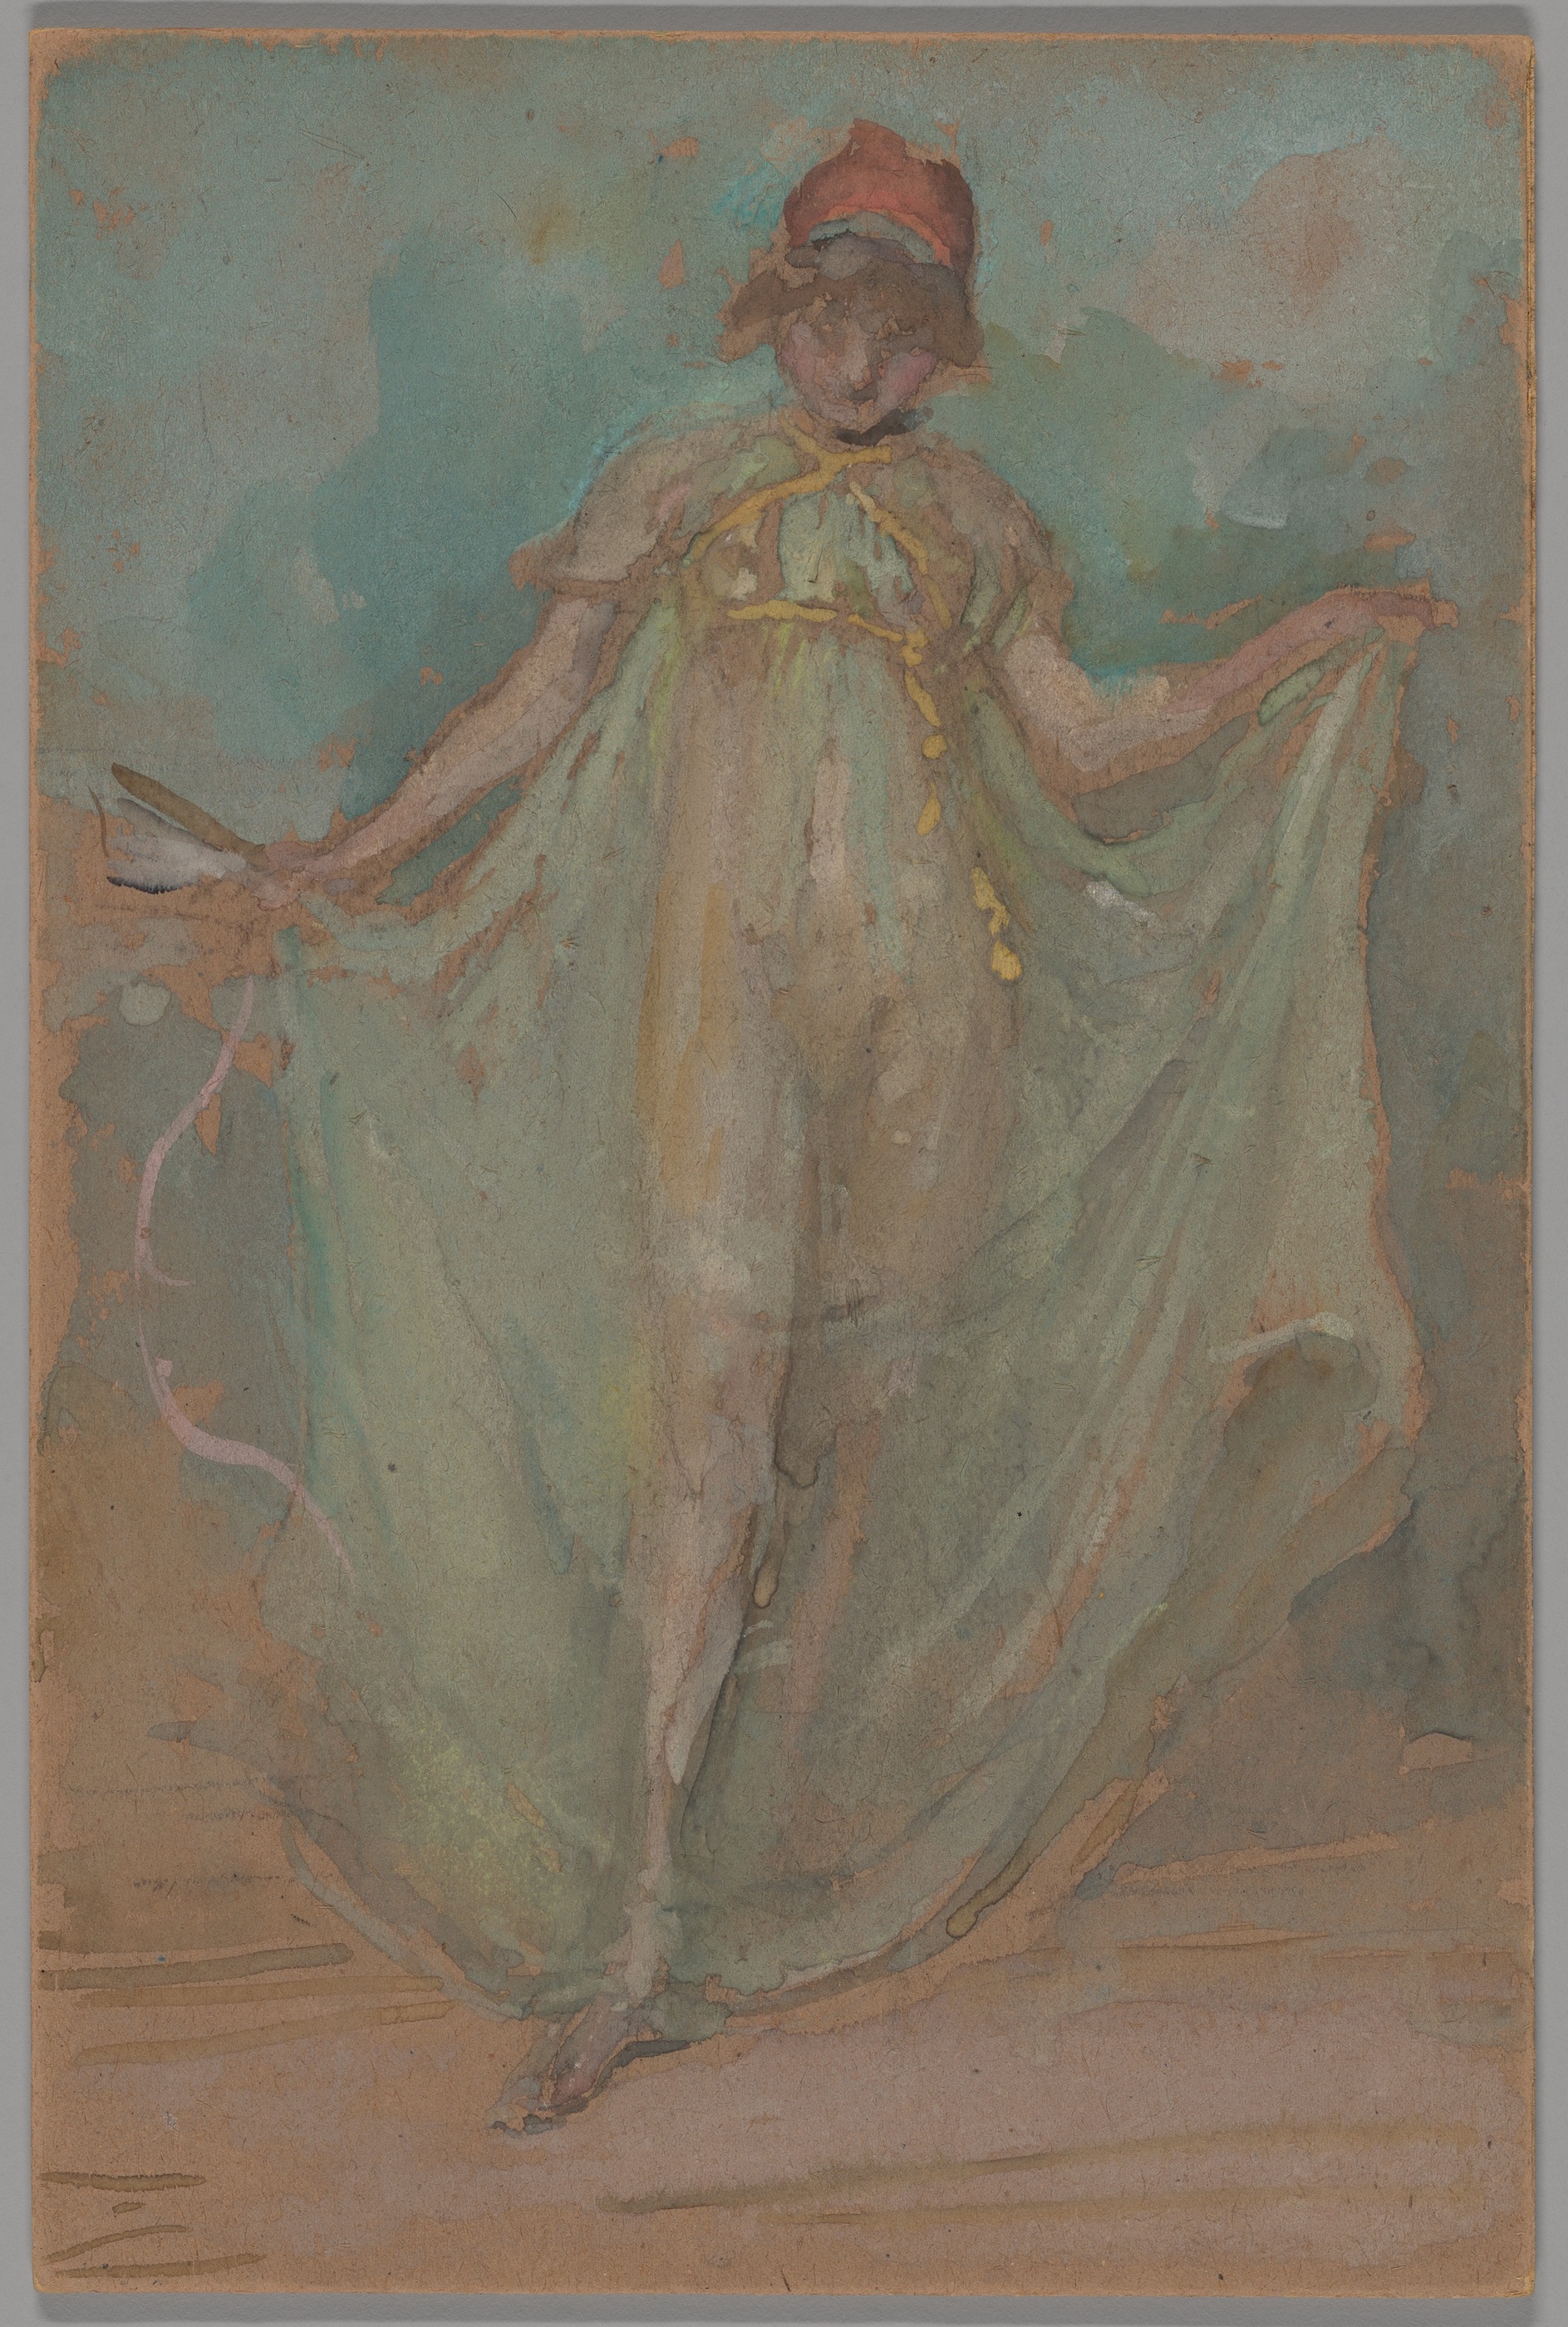 Green and Blue: The Dancer by James Abbott McNeill Whistler - c. 1893 - 27.5 × 18.3 cm Art Institute of Chicago